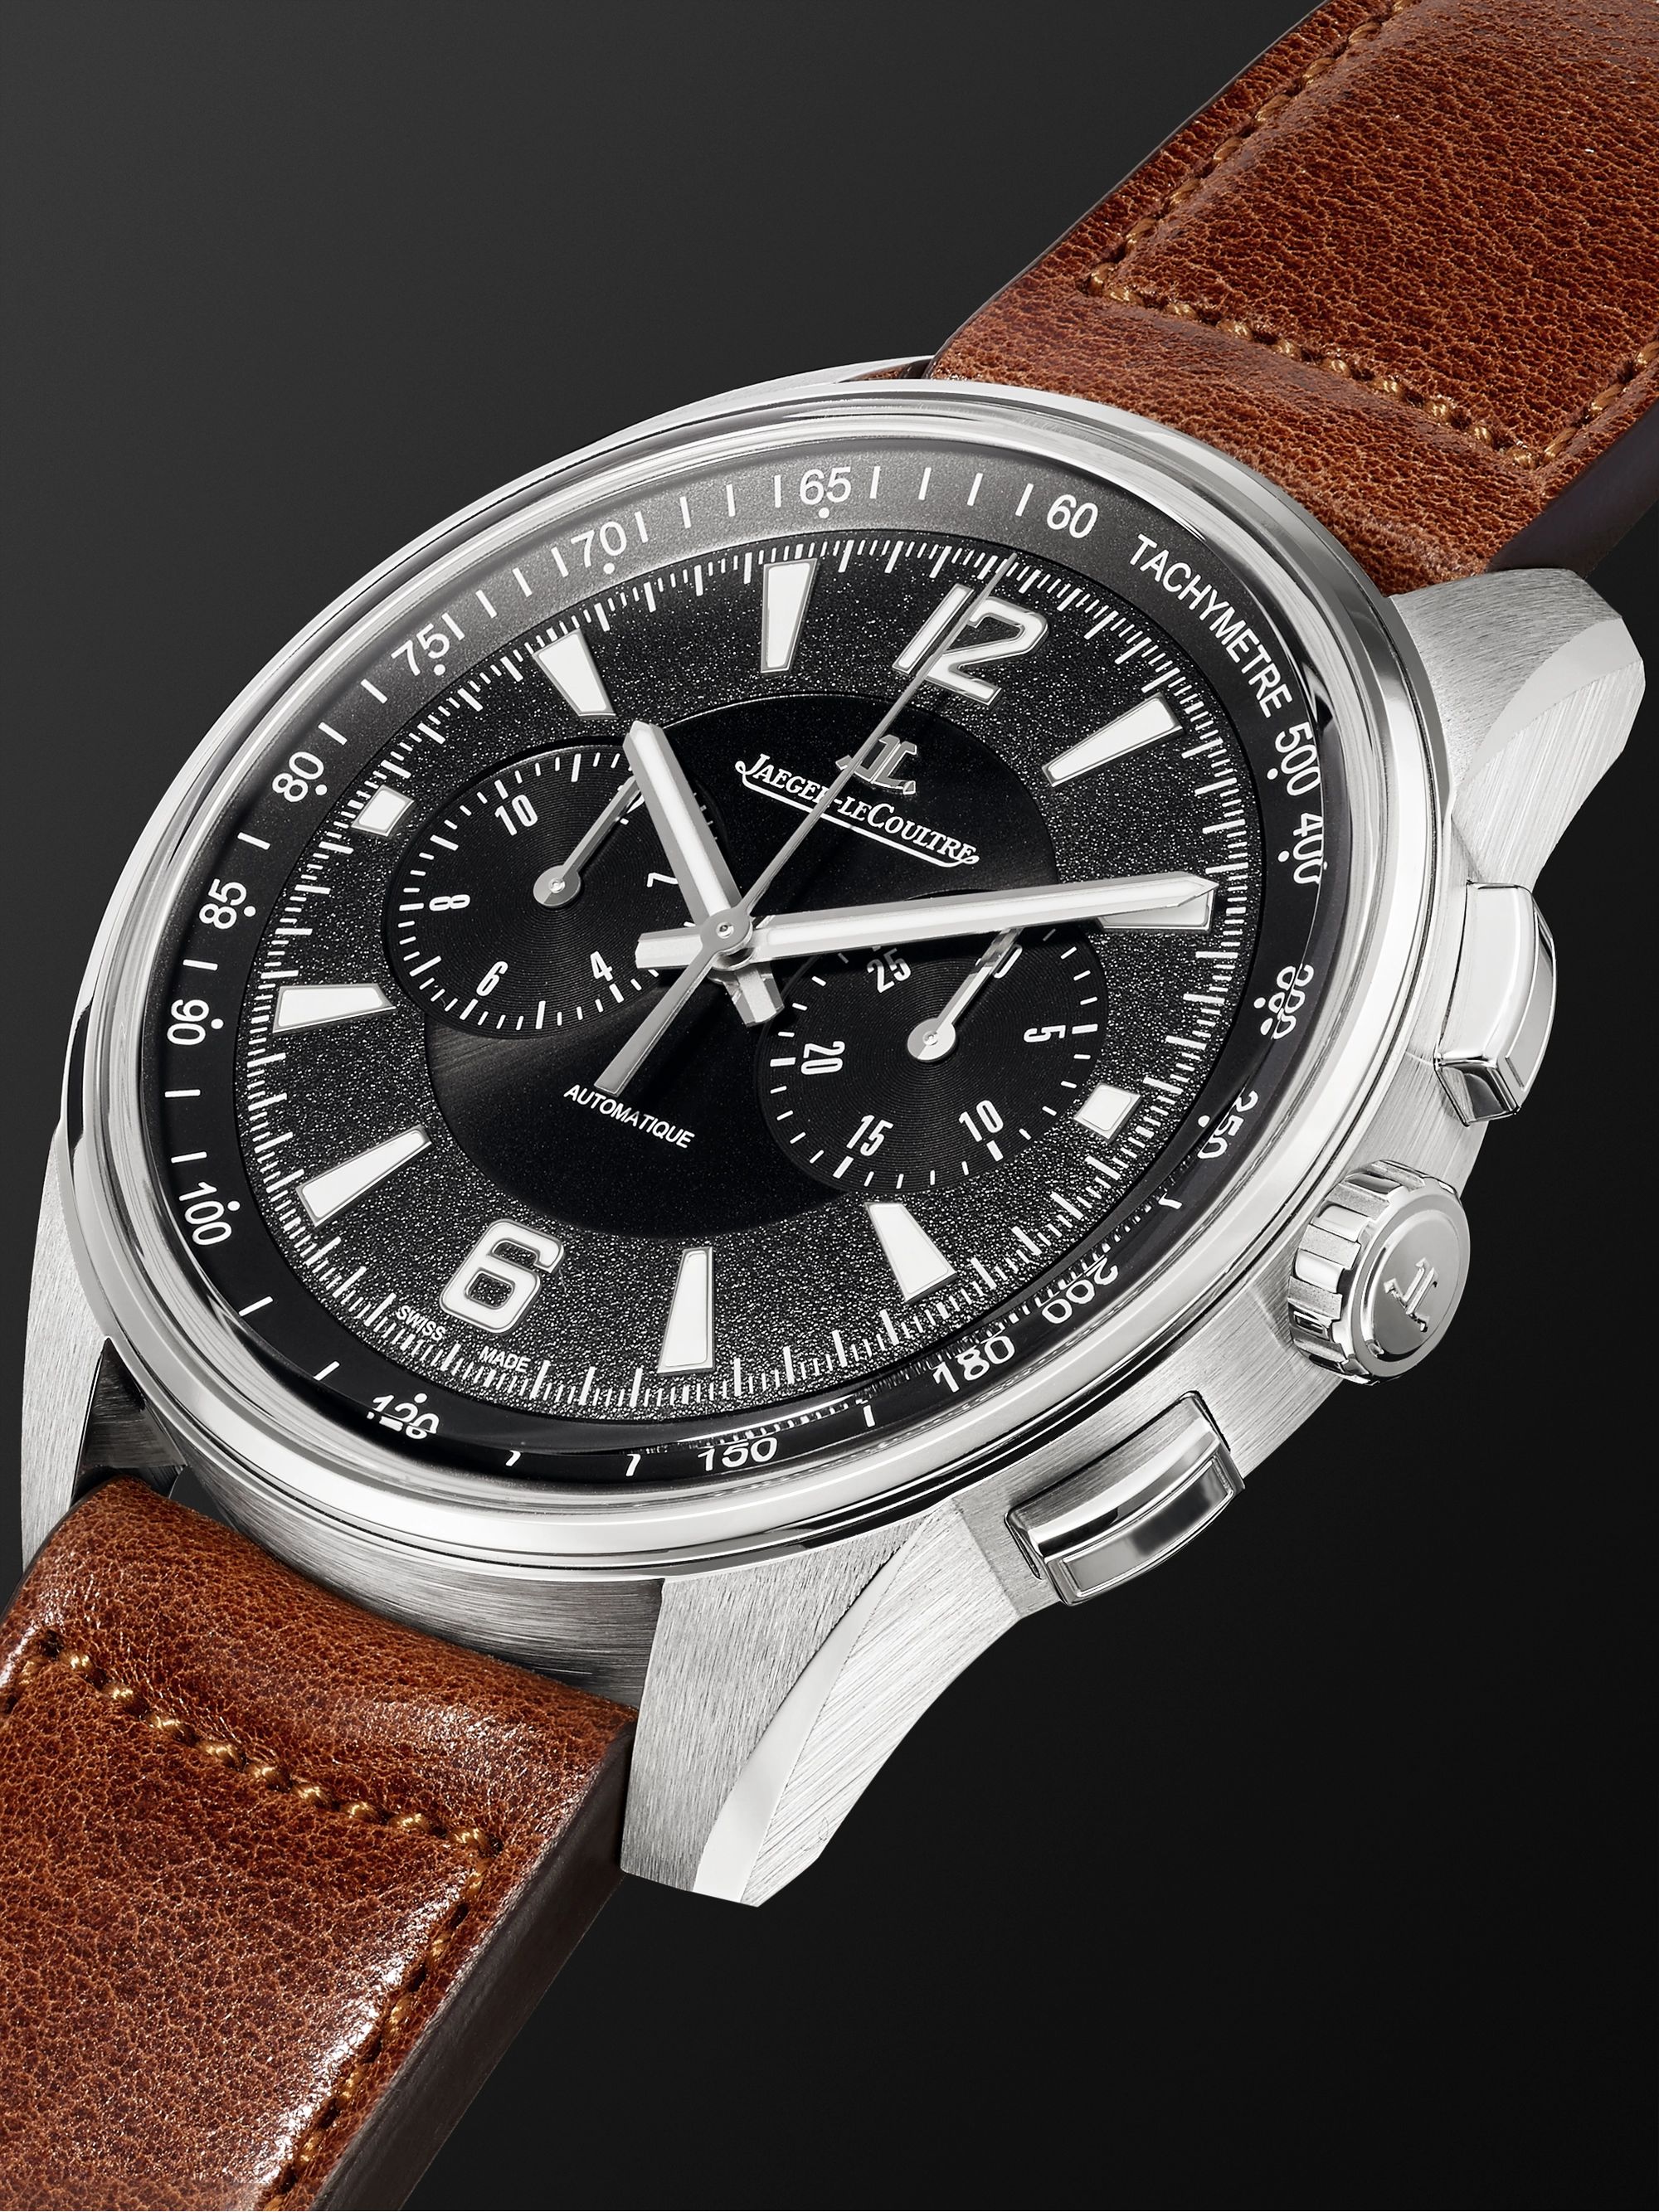 JAEGER-LECOULTRE Polaris Automatic Chronograph 42mm Stainless Steel and Leather Watch, Ref. No. Q9028471